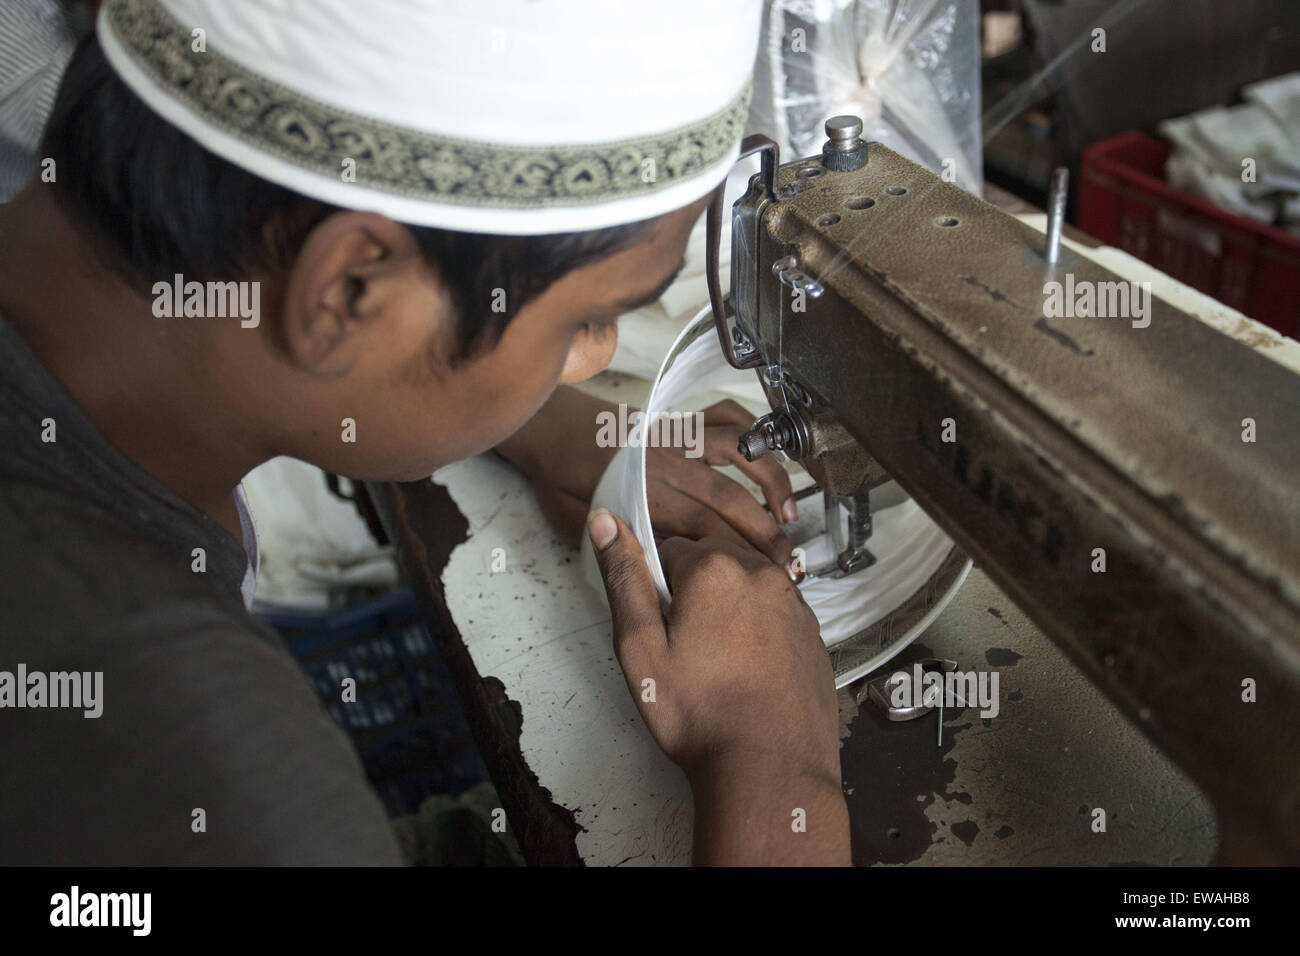 Dhaka, Bangladesh. 21st June, 2015. DHAKA, BANGLADESH 21st June : worker is busy at a factory in old Dhaka to making Tupi or prayer hats during holy Ramadan in Dhaka on 21st June 2015.There is a great demand for locally made prayer caps both at home and abroad. About 60 percent of all tupis manufactured are exported to countries like Pakistan, Saudi Arabia, India, and other muslim countries. The rest is supplied to the domestic market.The livelihood of nearly three thousand craftsmen who make prayer caps (tupi) hang in the balance as around a hundred tupi factories in the old part of the cit Stock Photo